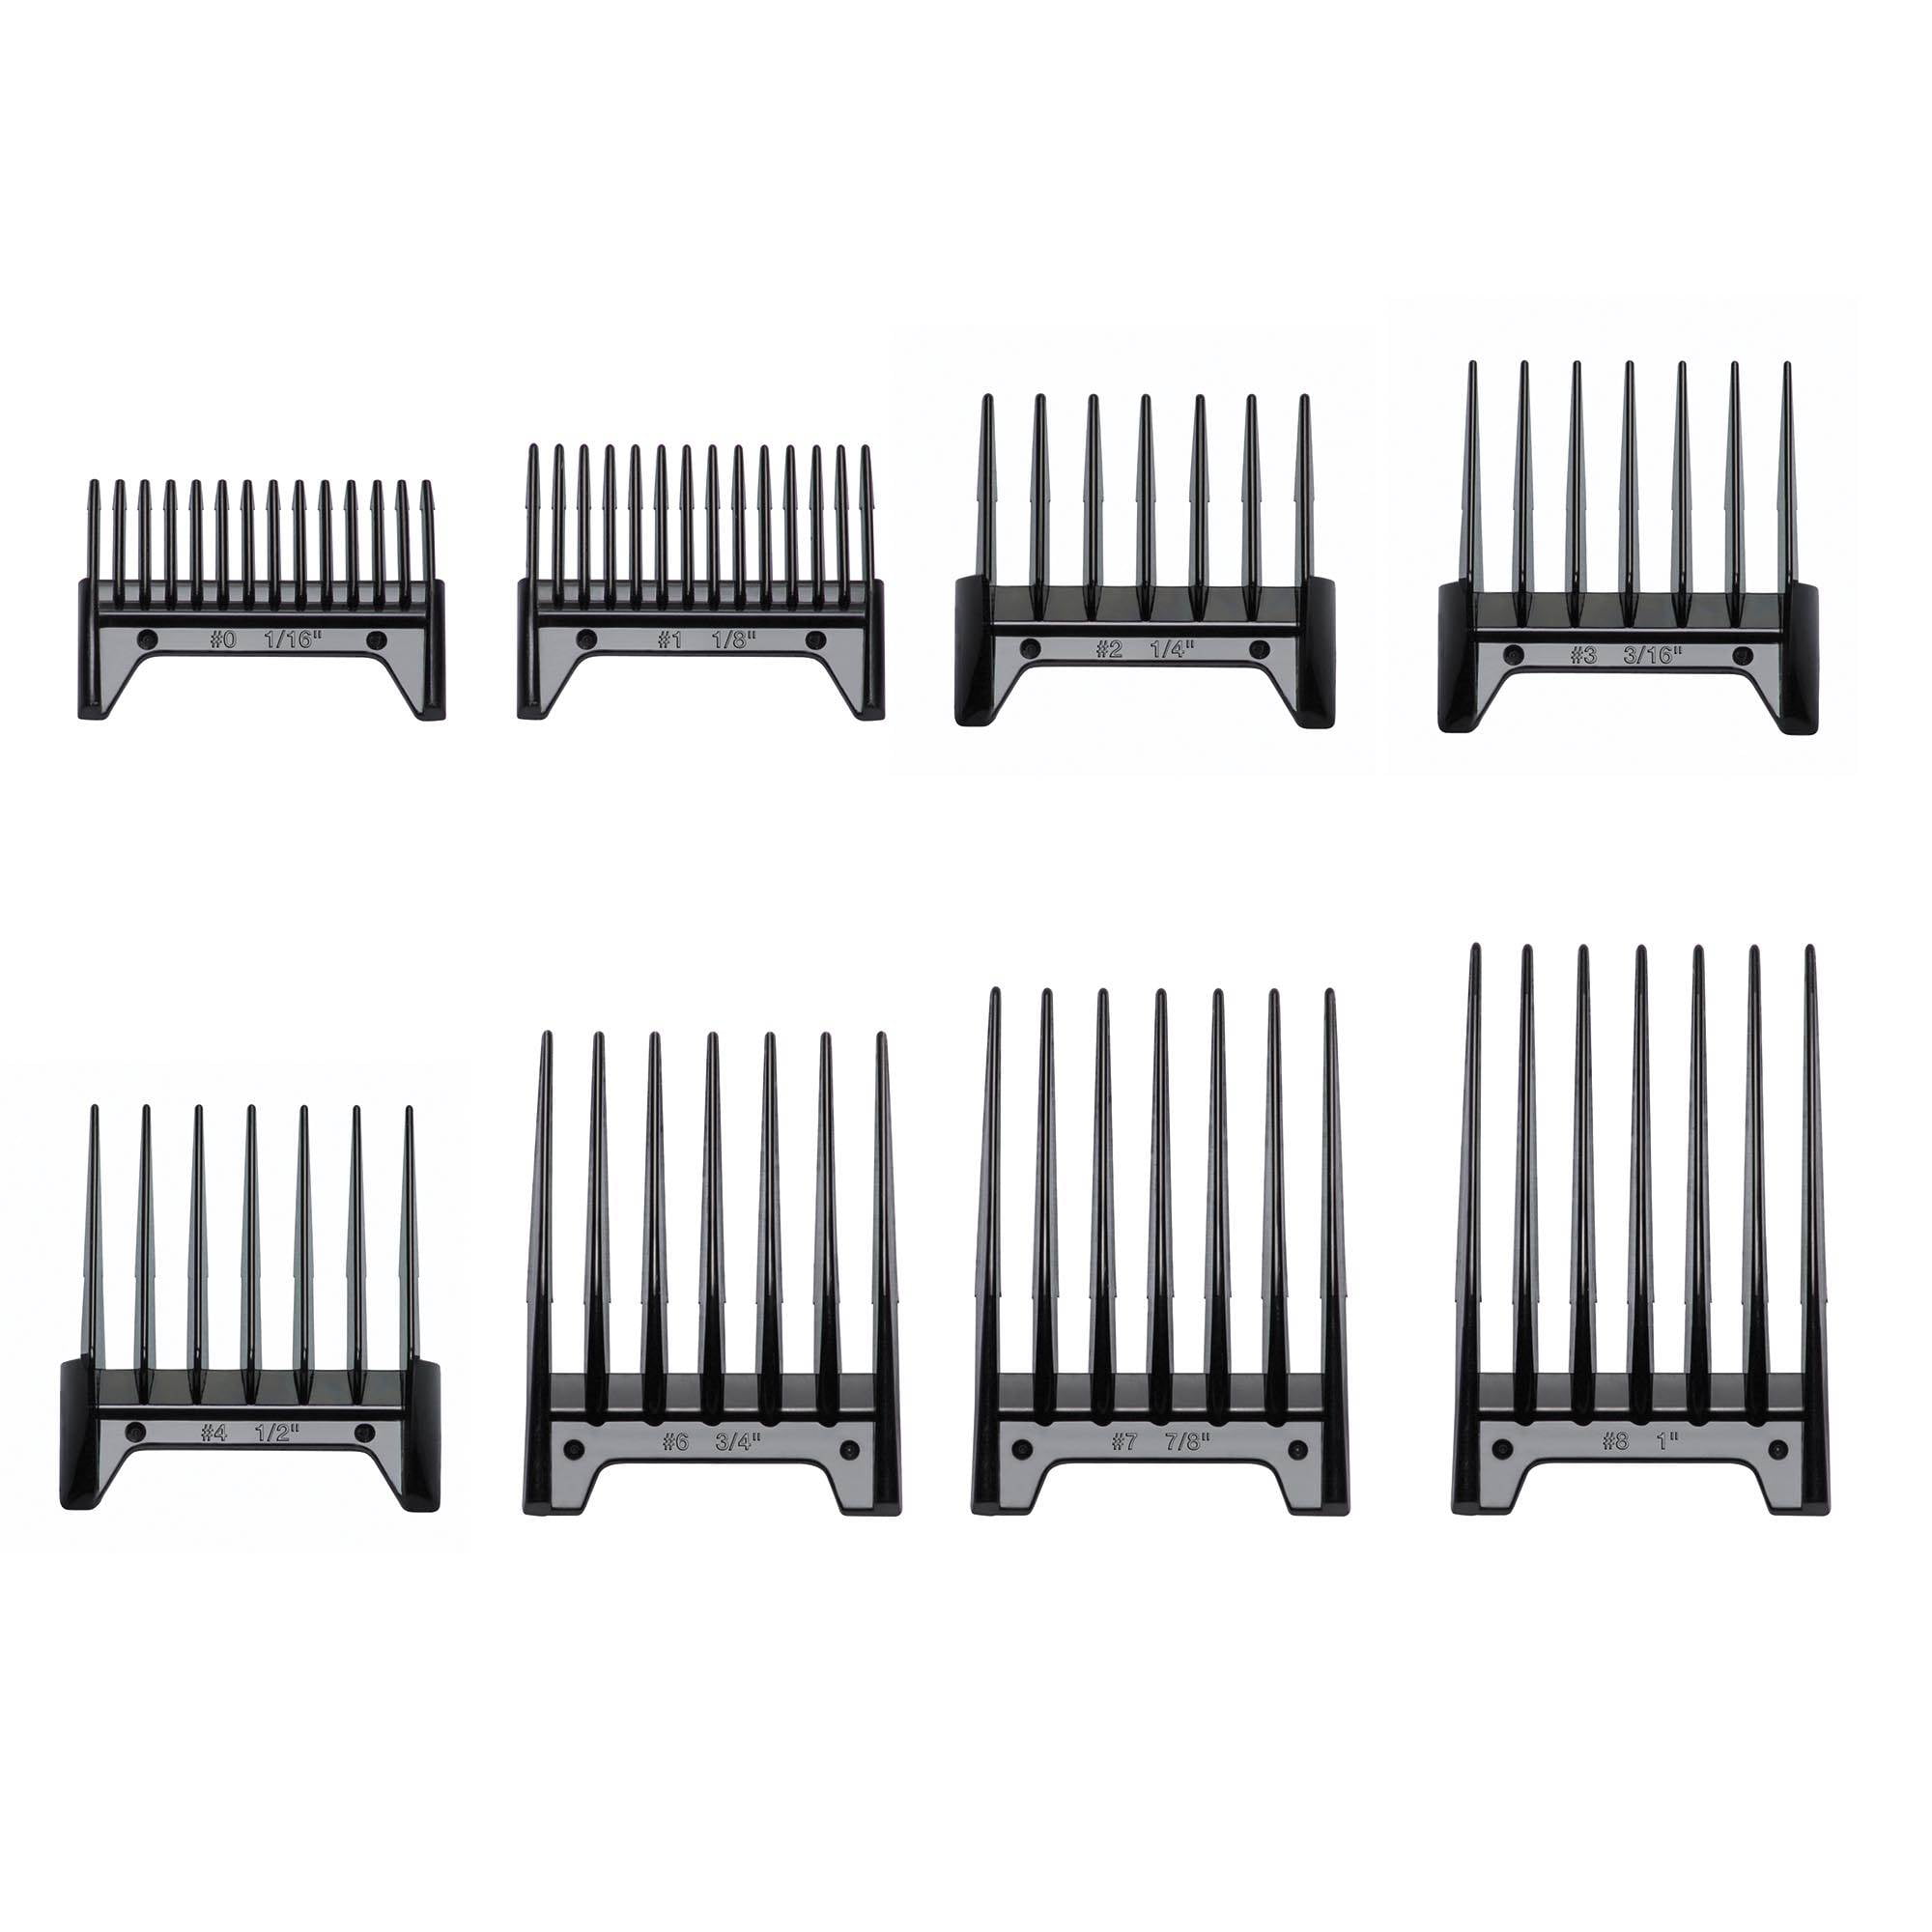 oster dog clipper attachment combs